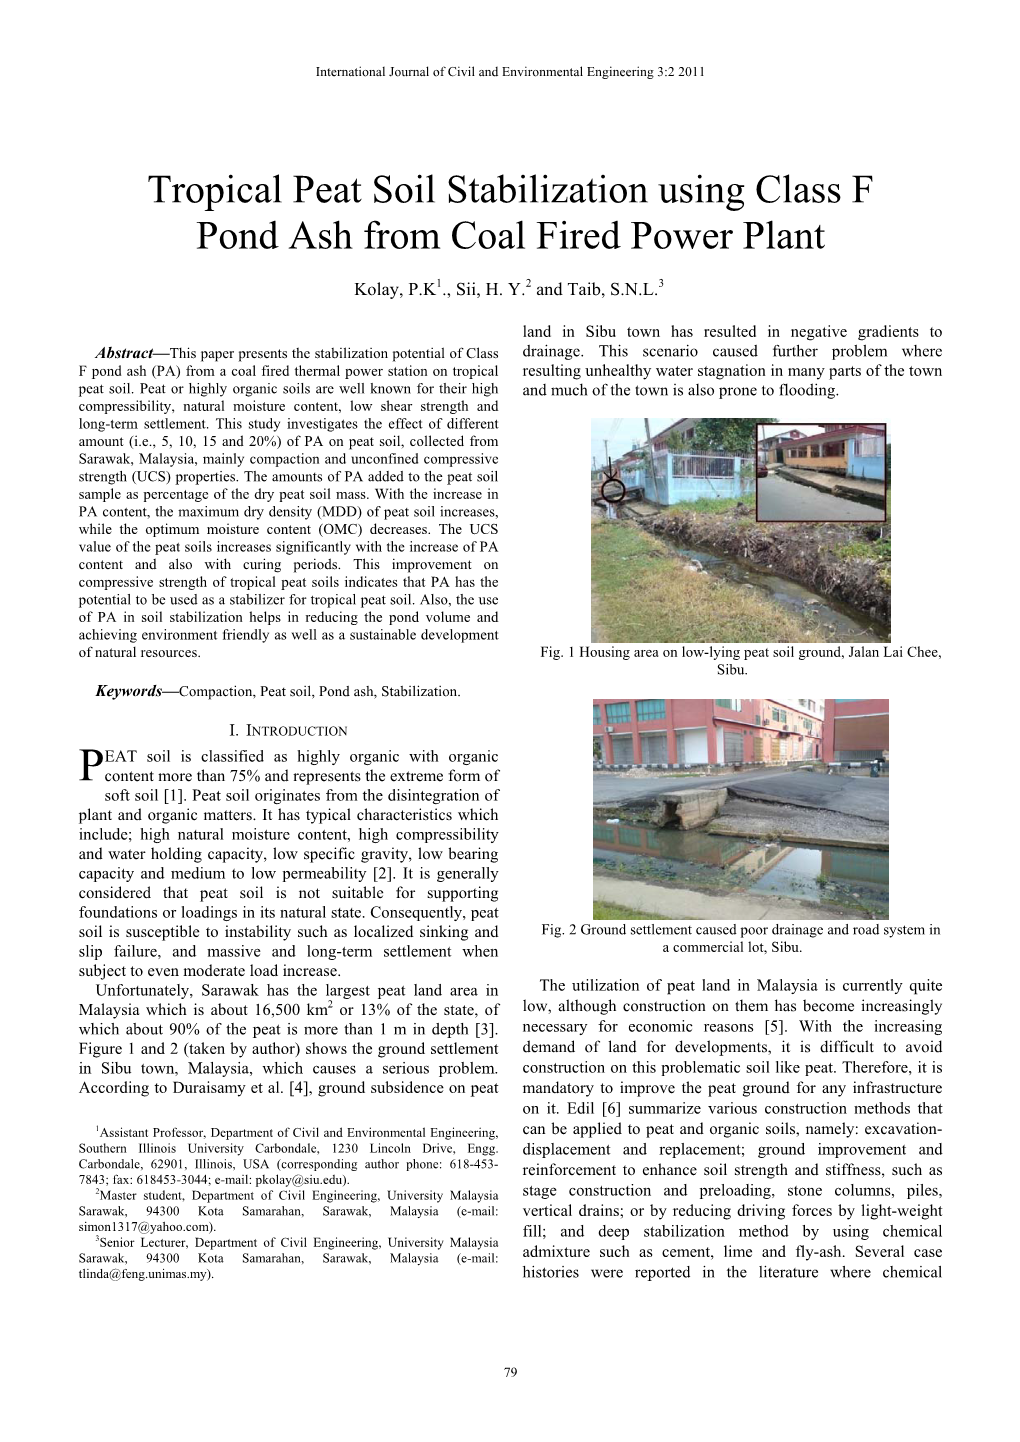 Tropical Peat Soil Stabilization Using Class F Pond Ash from Coal Fired Power Plant